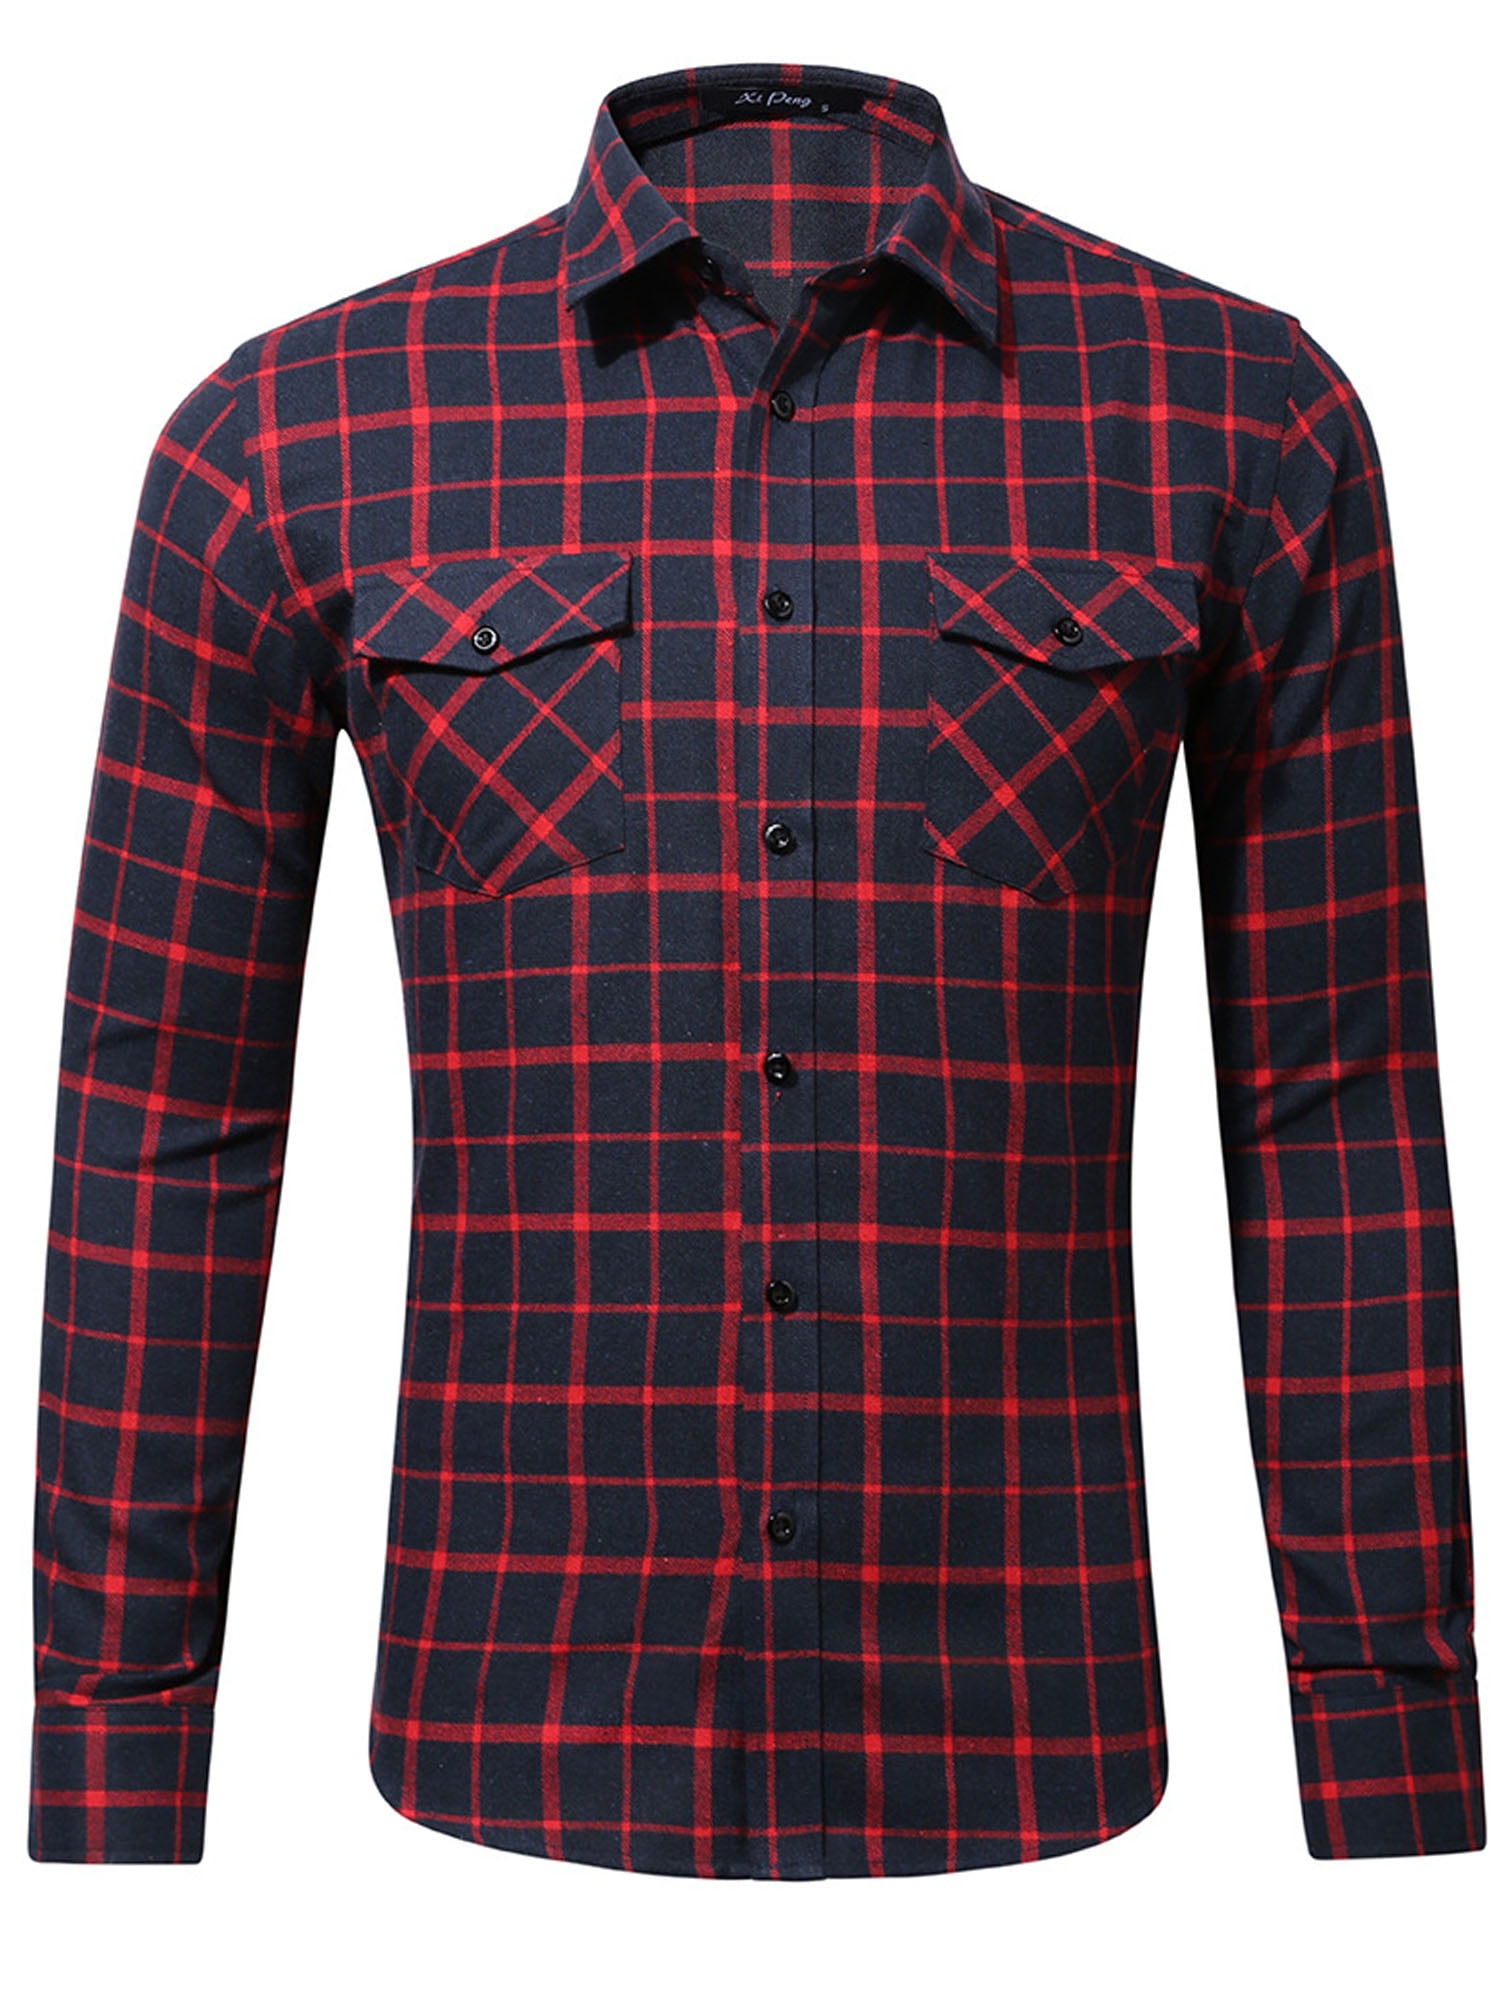 Mens red button down shirts - leathergas